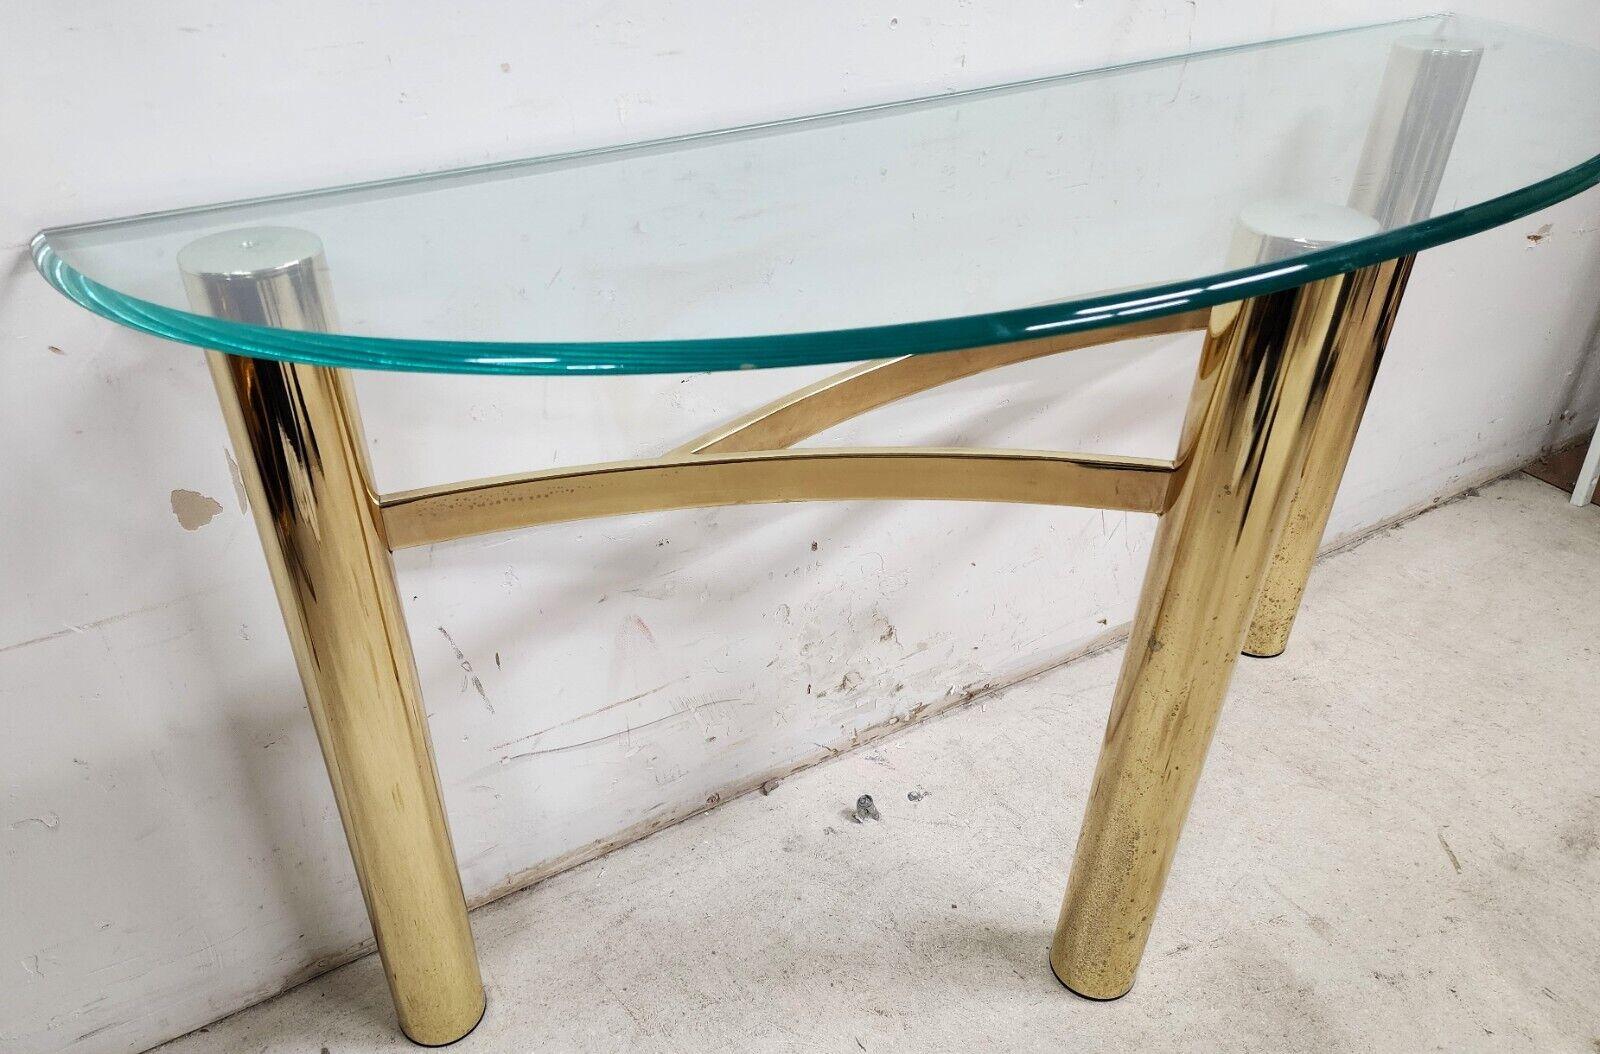 mcm console table